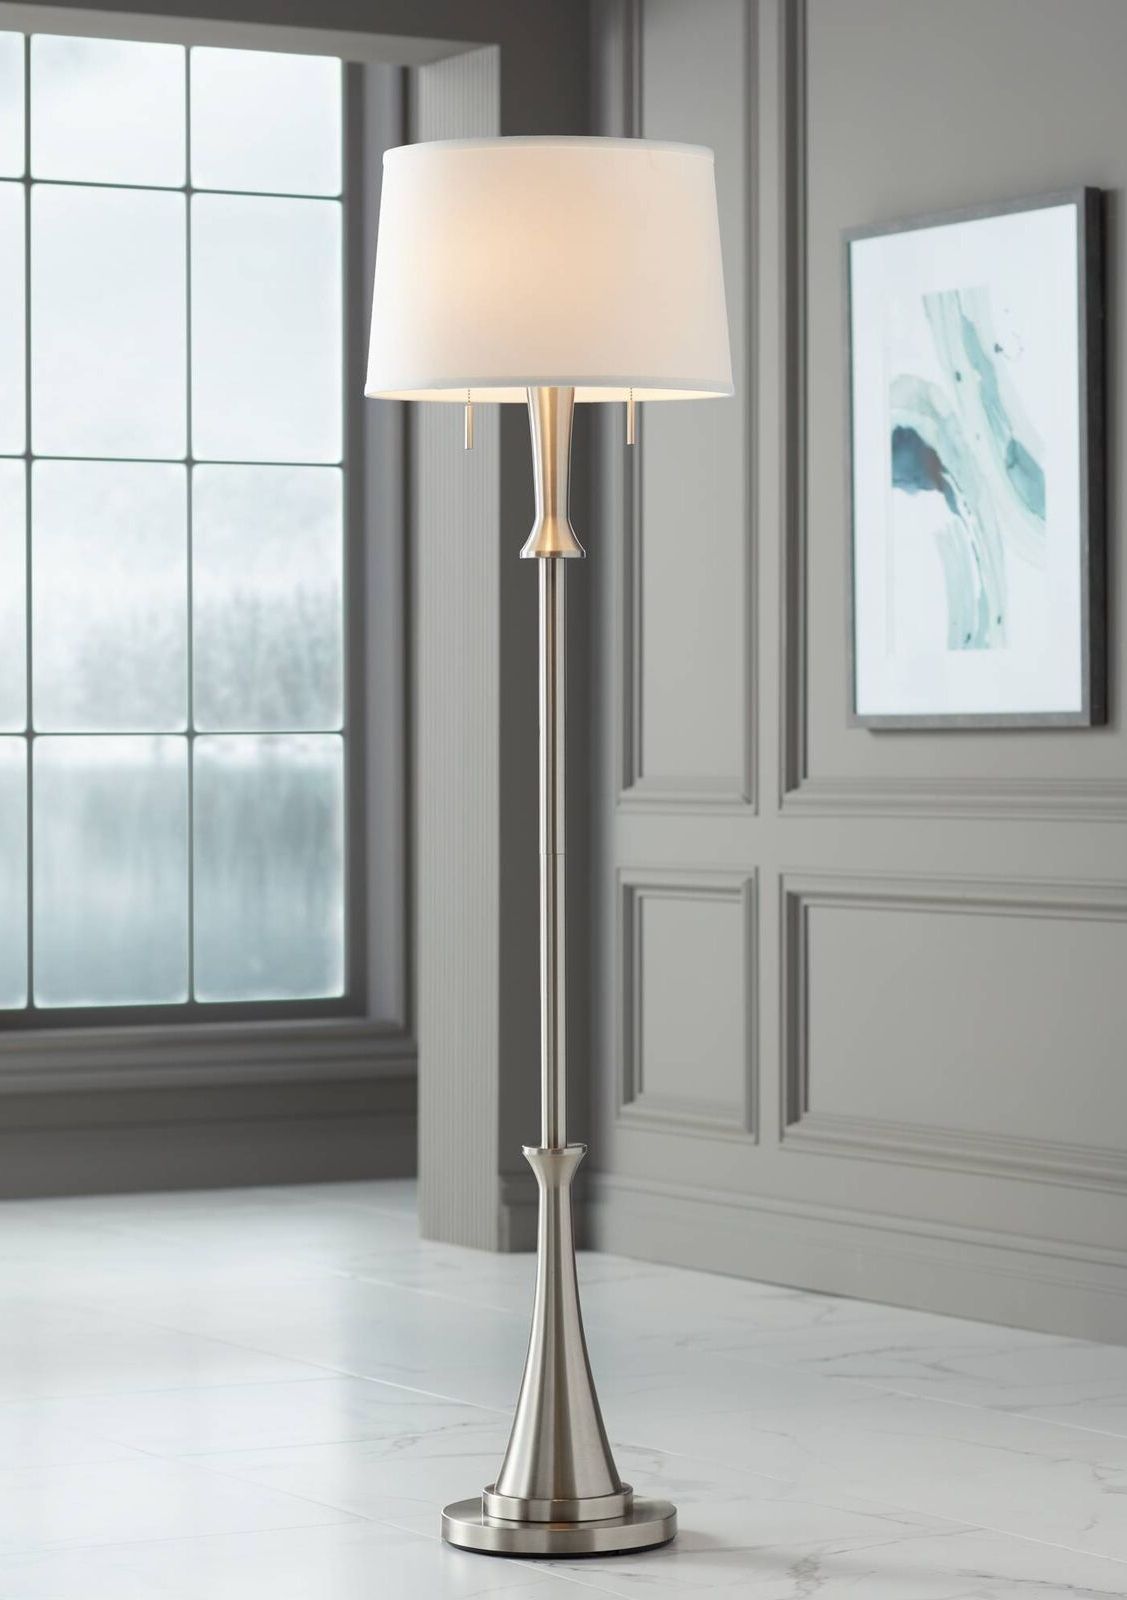 Modern Floor Lamp Brushed Nickel White Drum Shade For Living Room Reading  House (View 8 of 15)